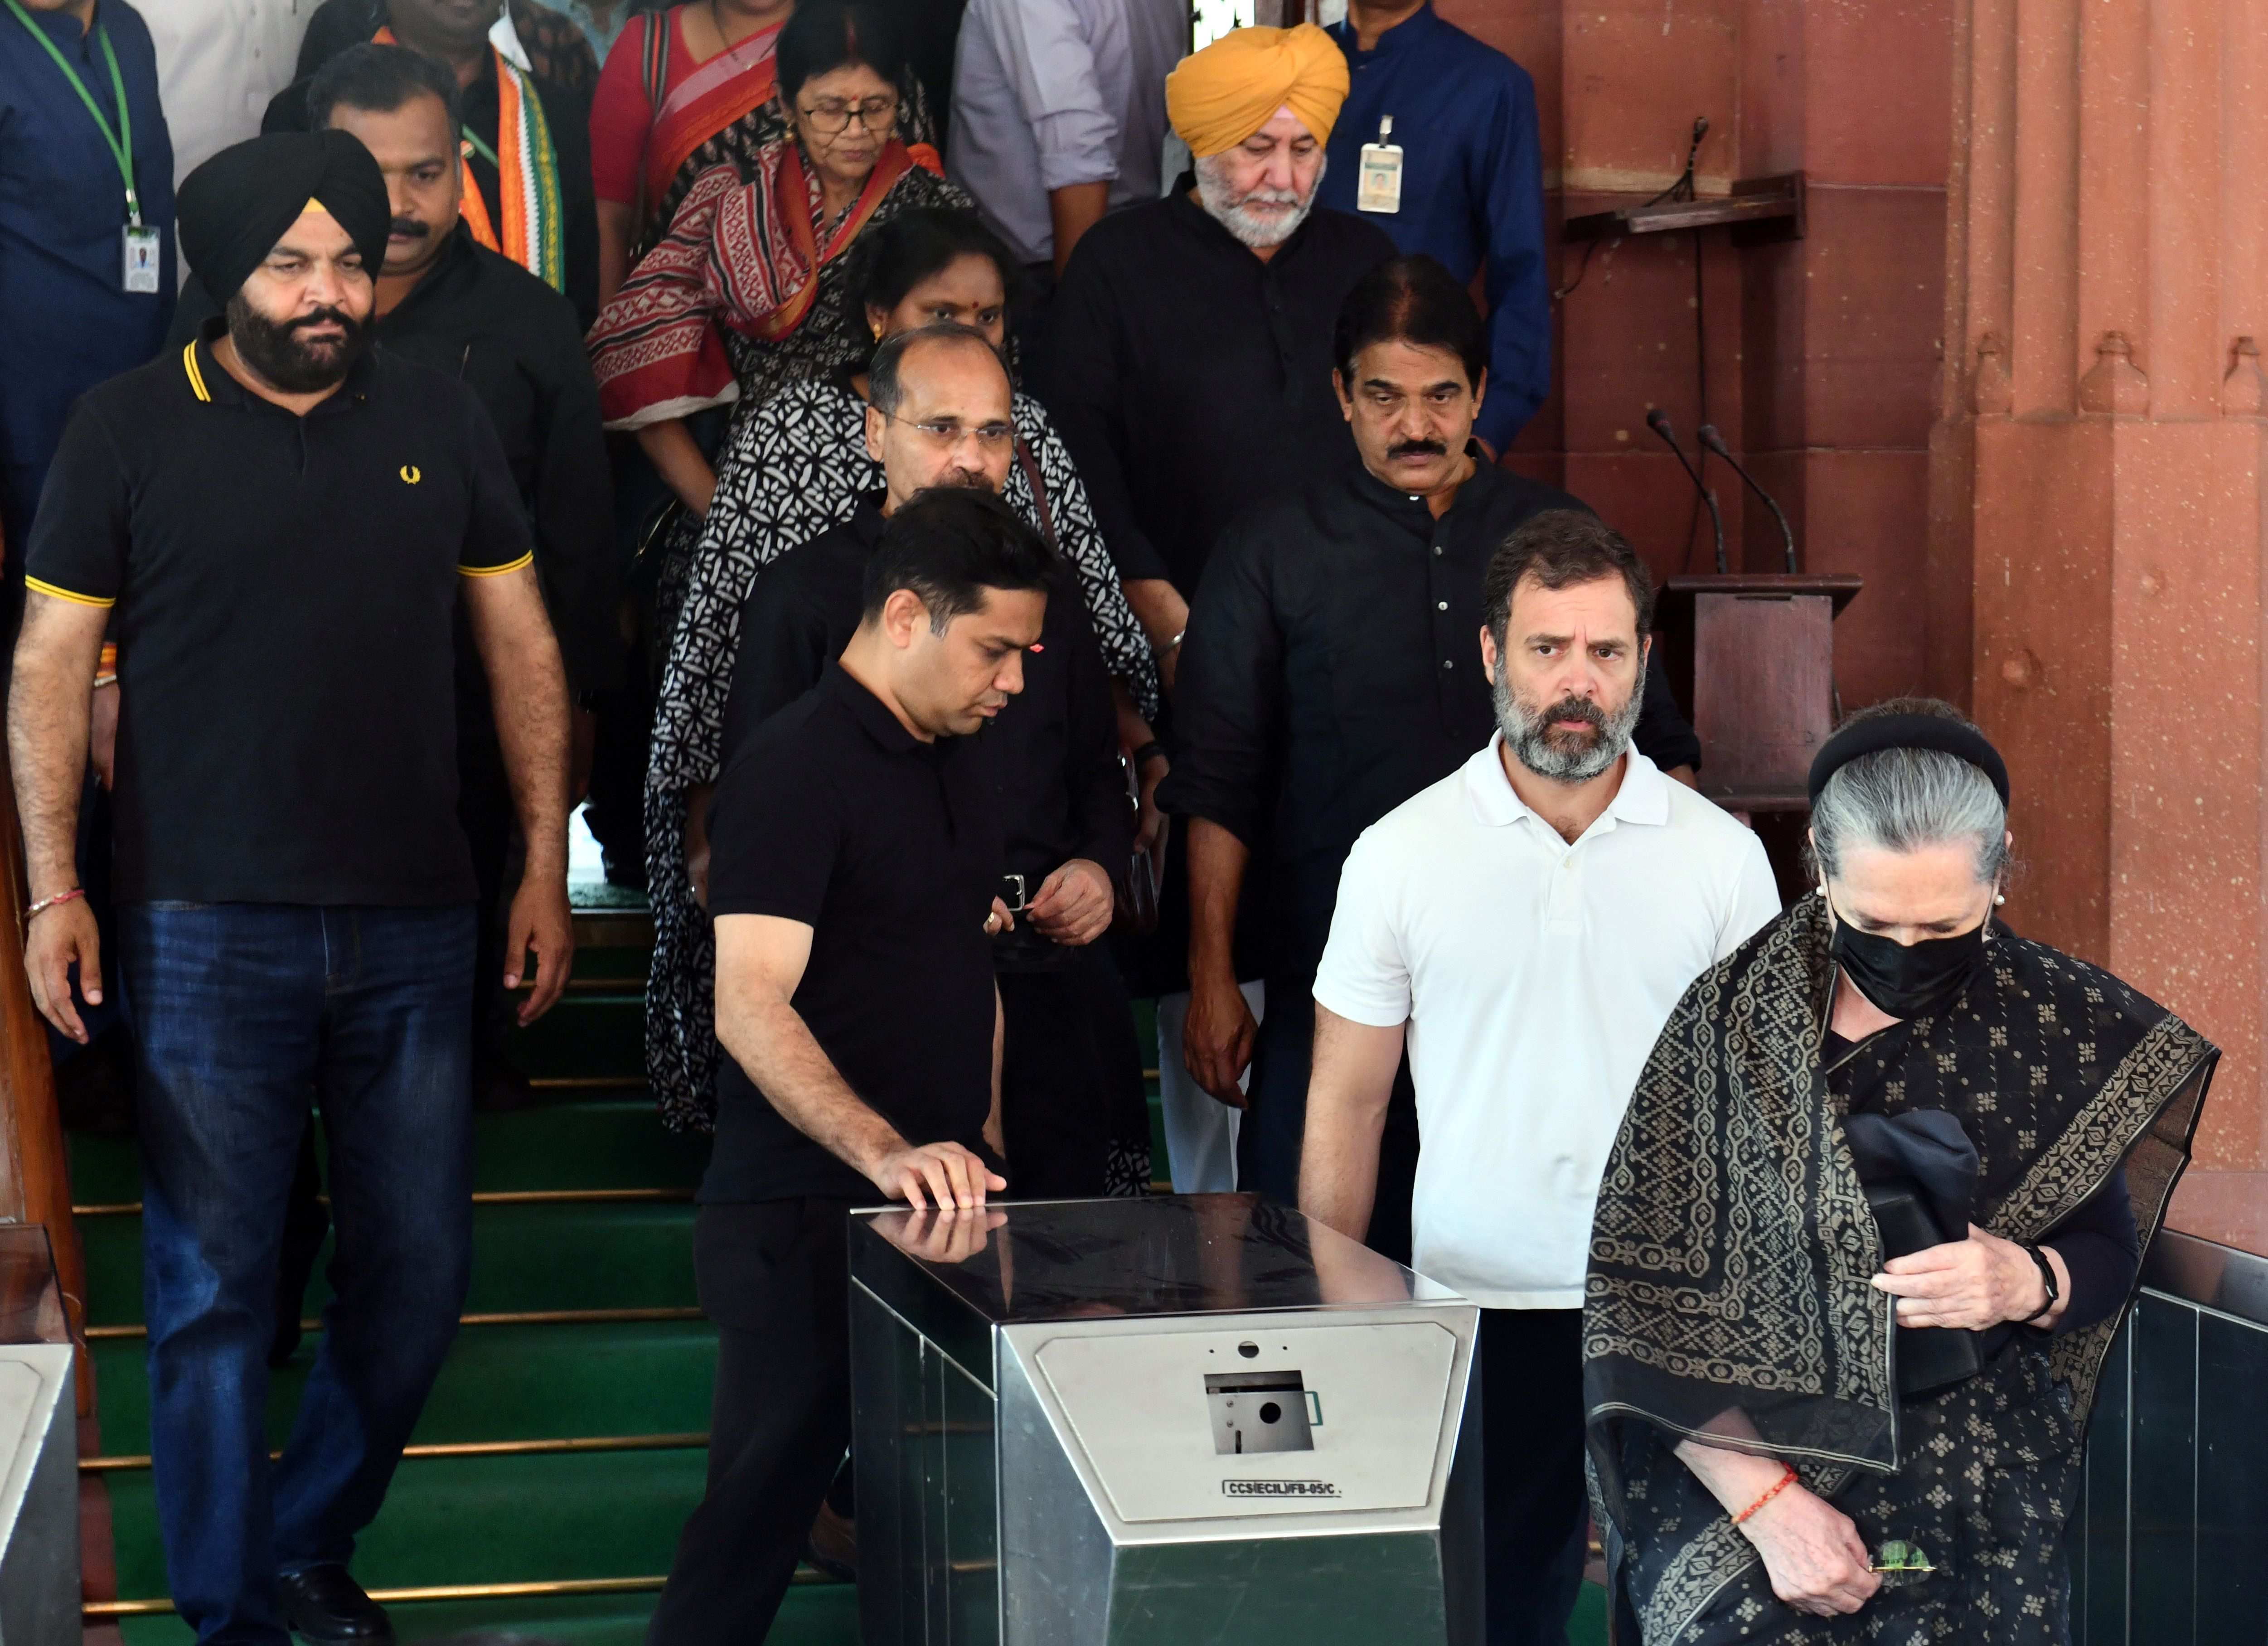 BJP cries ‘foreign influence’ as US and Germany remark on Rahul’s disqualification from LS